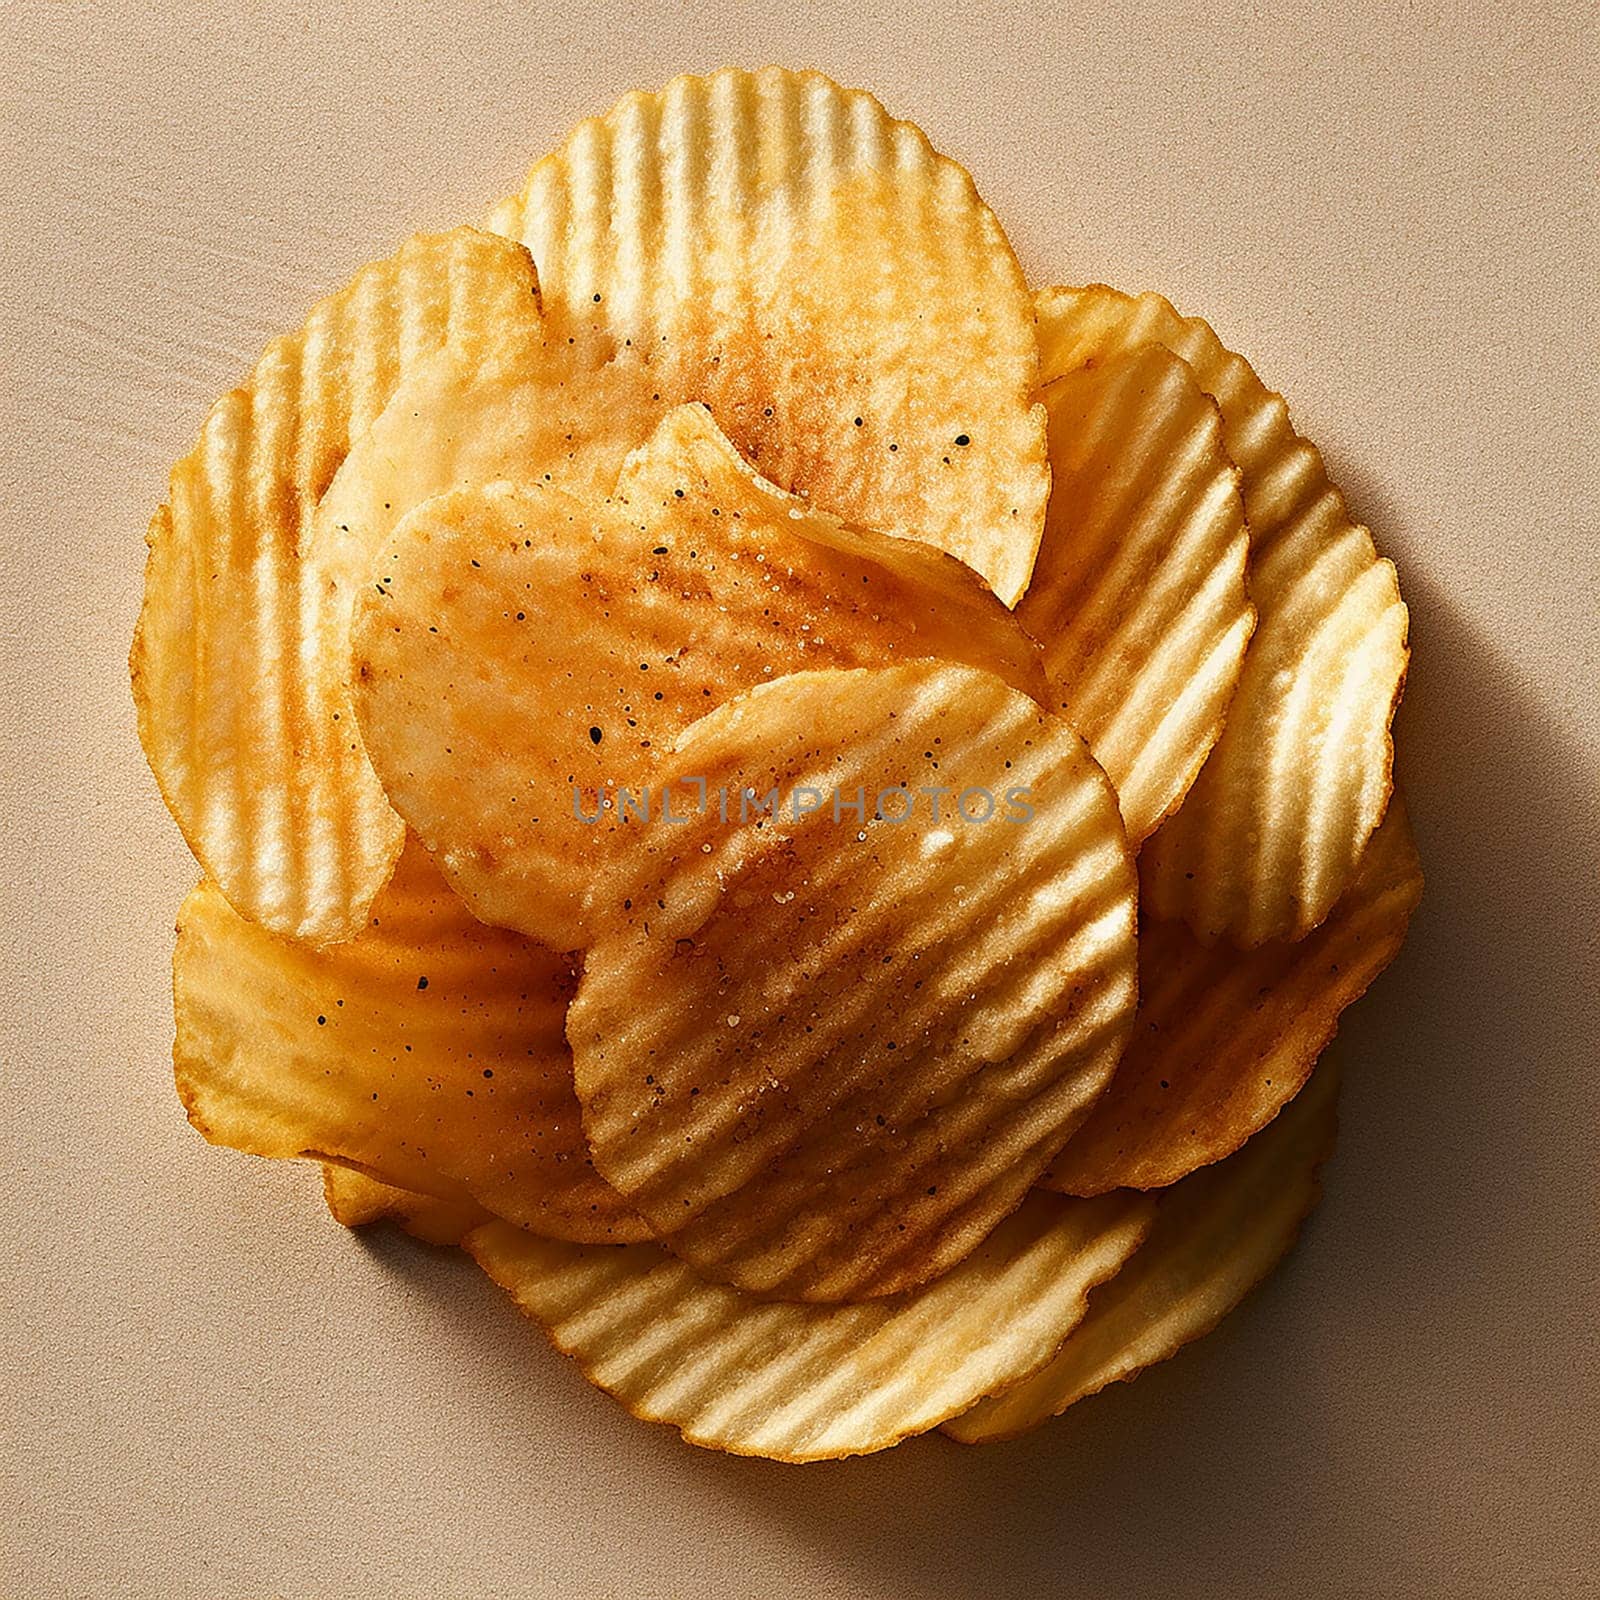 A pile of various crispy potato chips with salt, on upper view by Hype2art